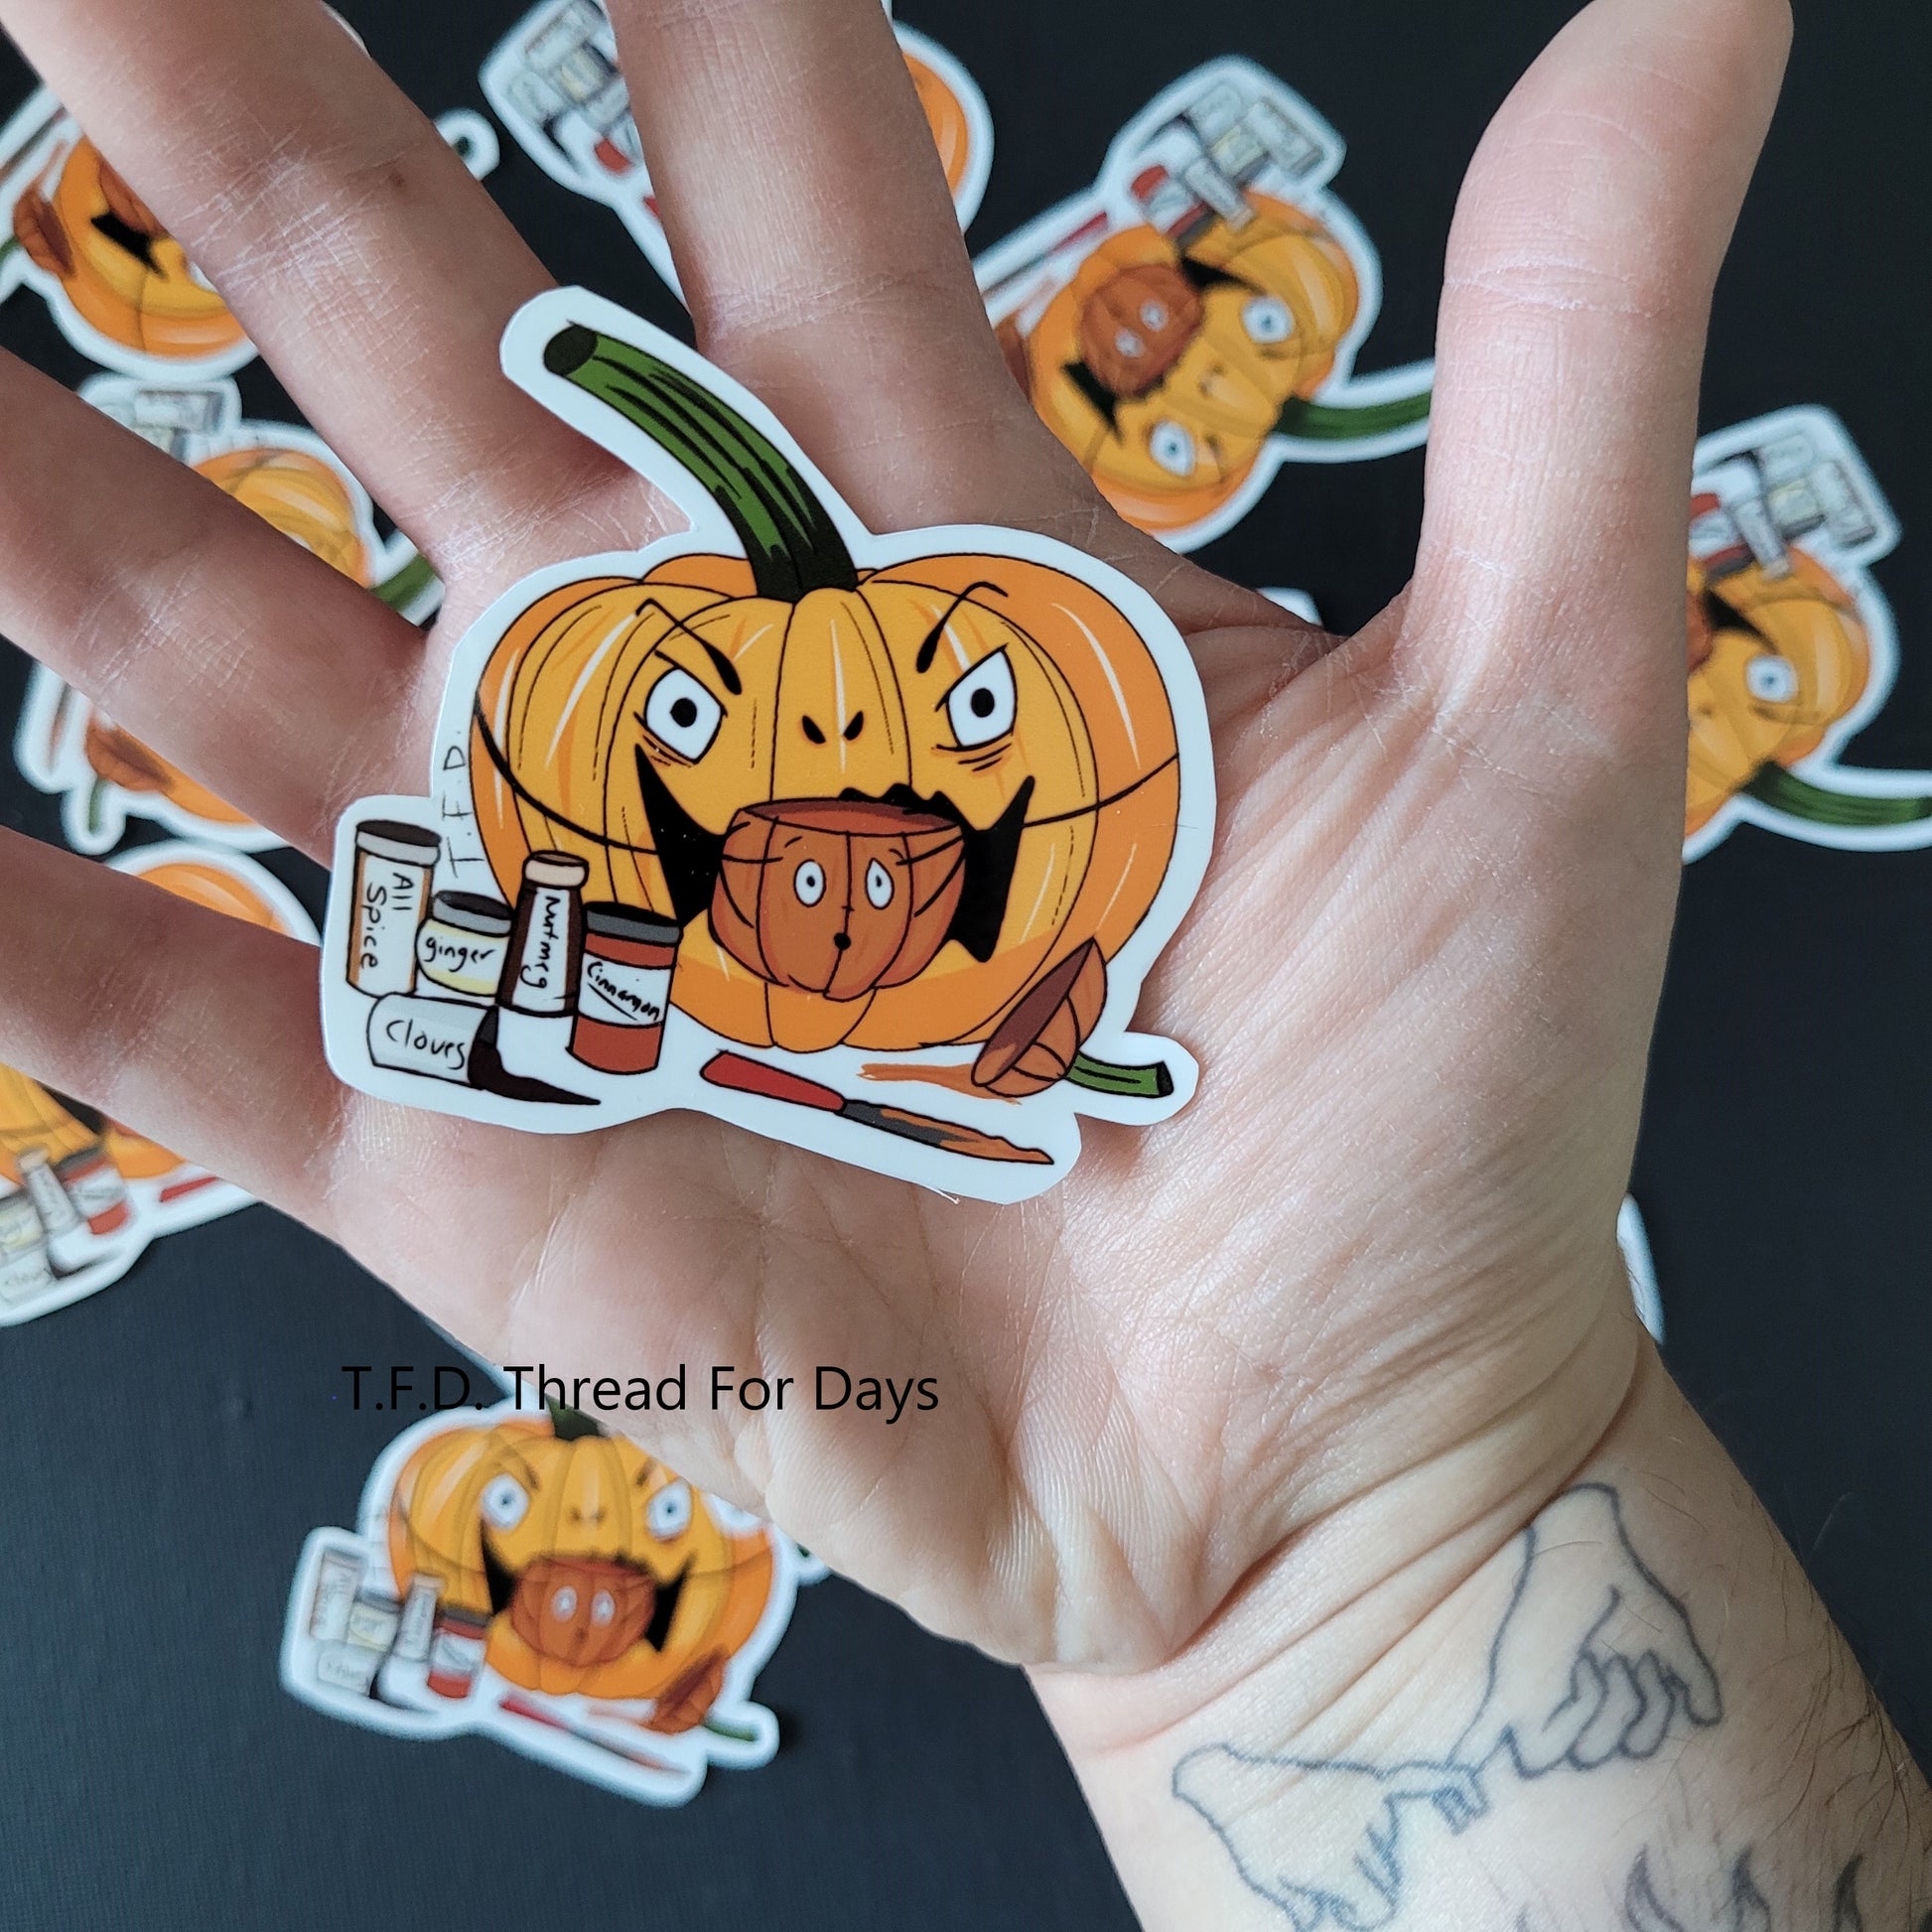 silence of the yams sticker held in palm of hand to demonstrate size